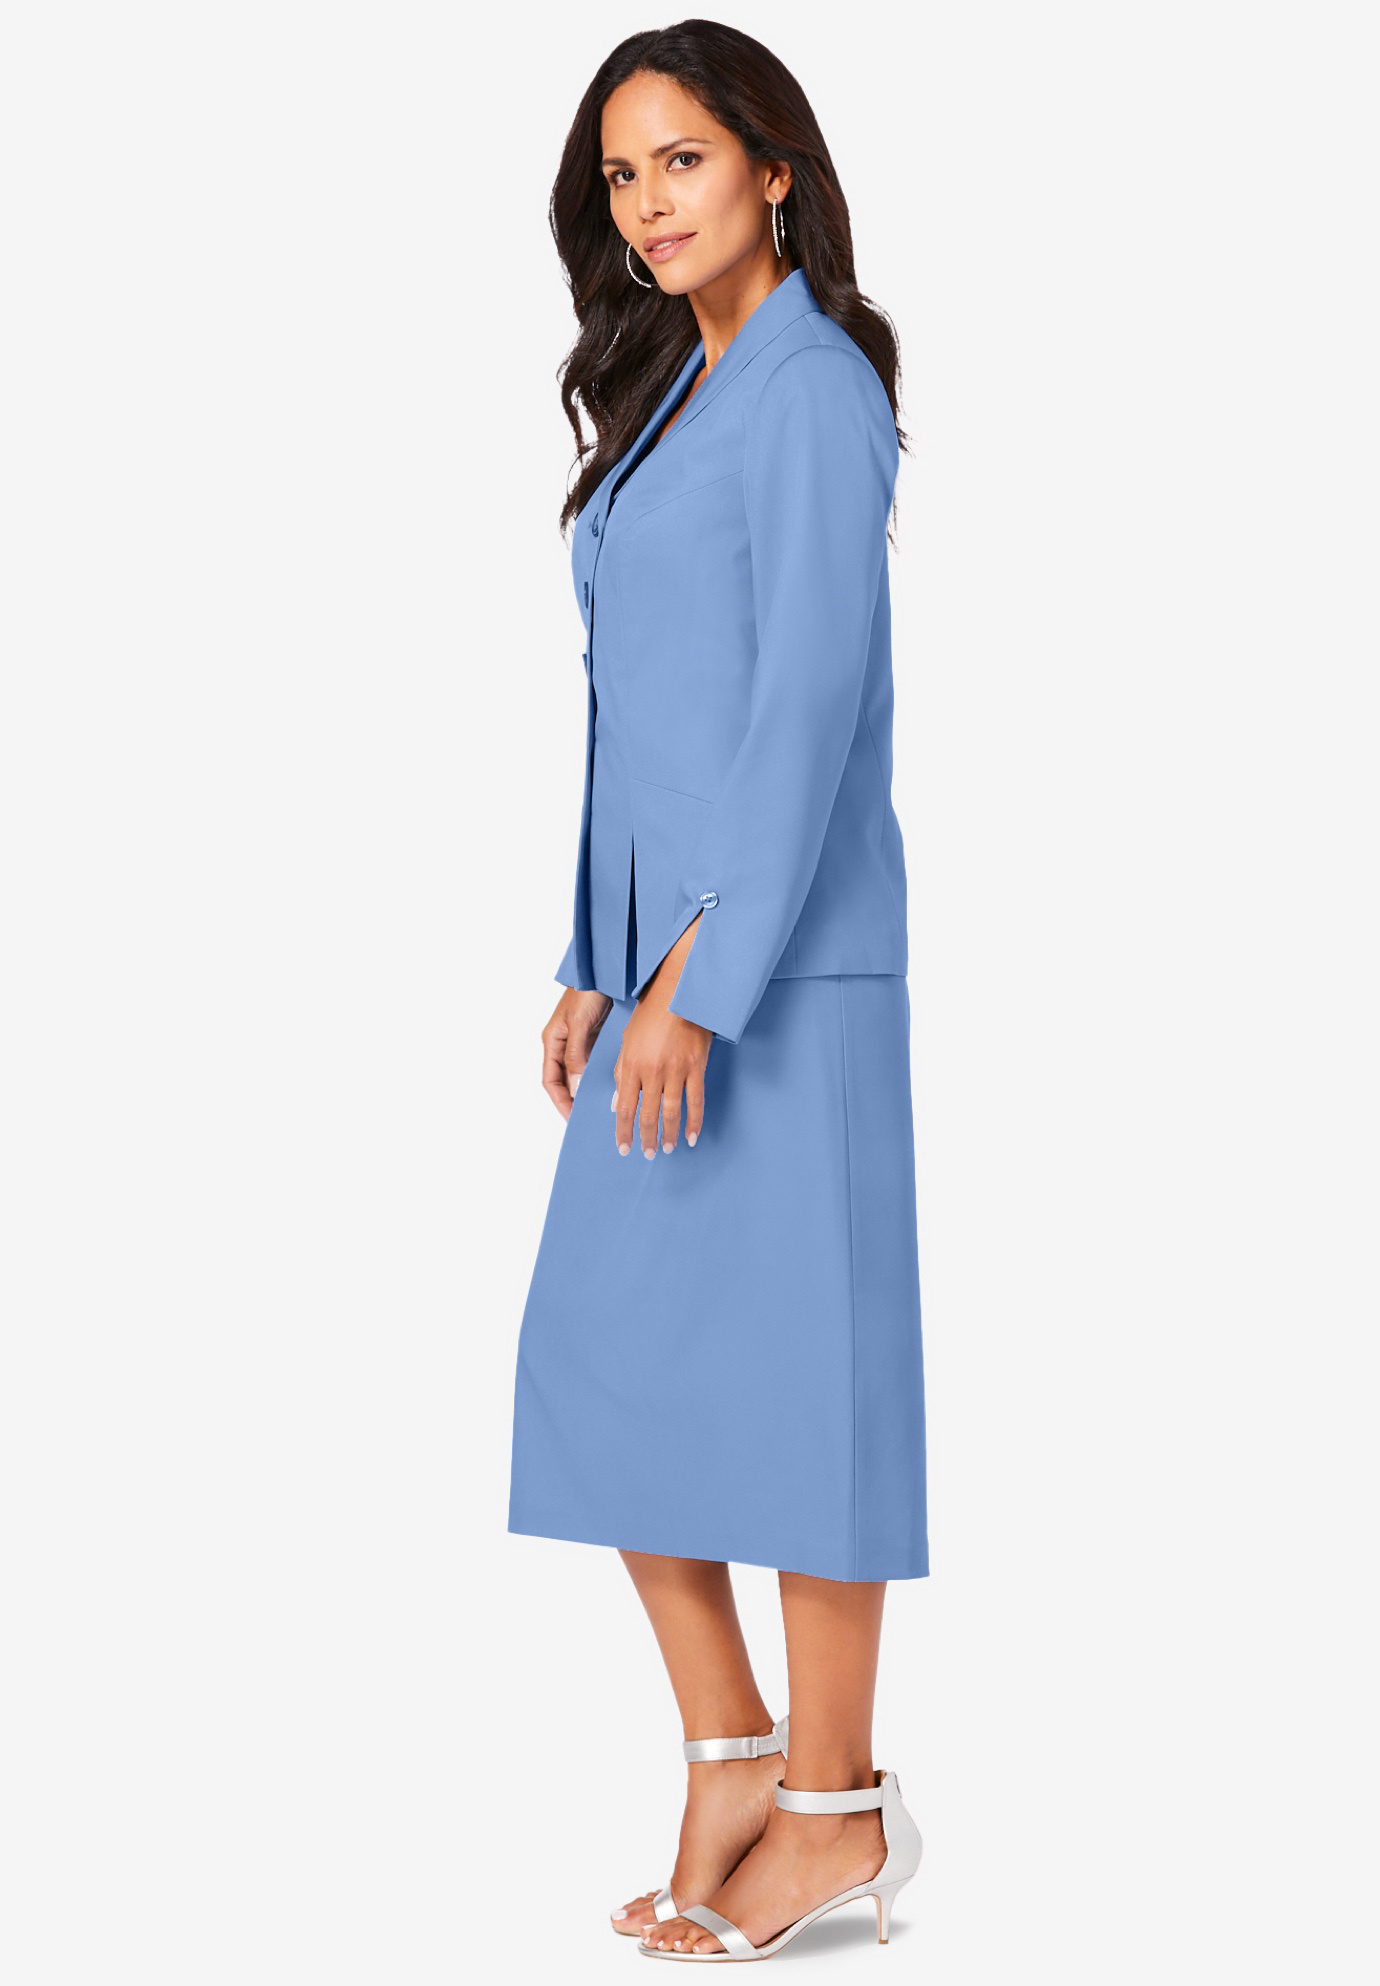 Roaman's Women's Plus Size Two-Piece Skirt Suit With Shawl-Collar Jacket Skirt Suit - image 4 of 5